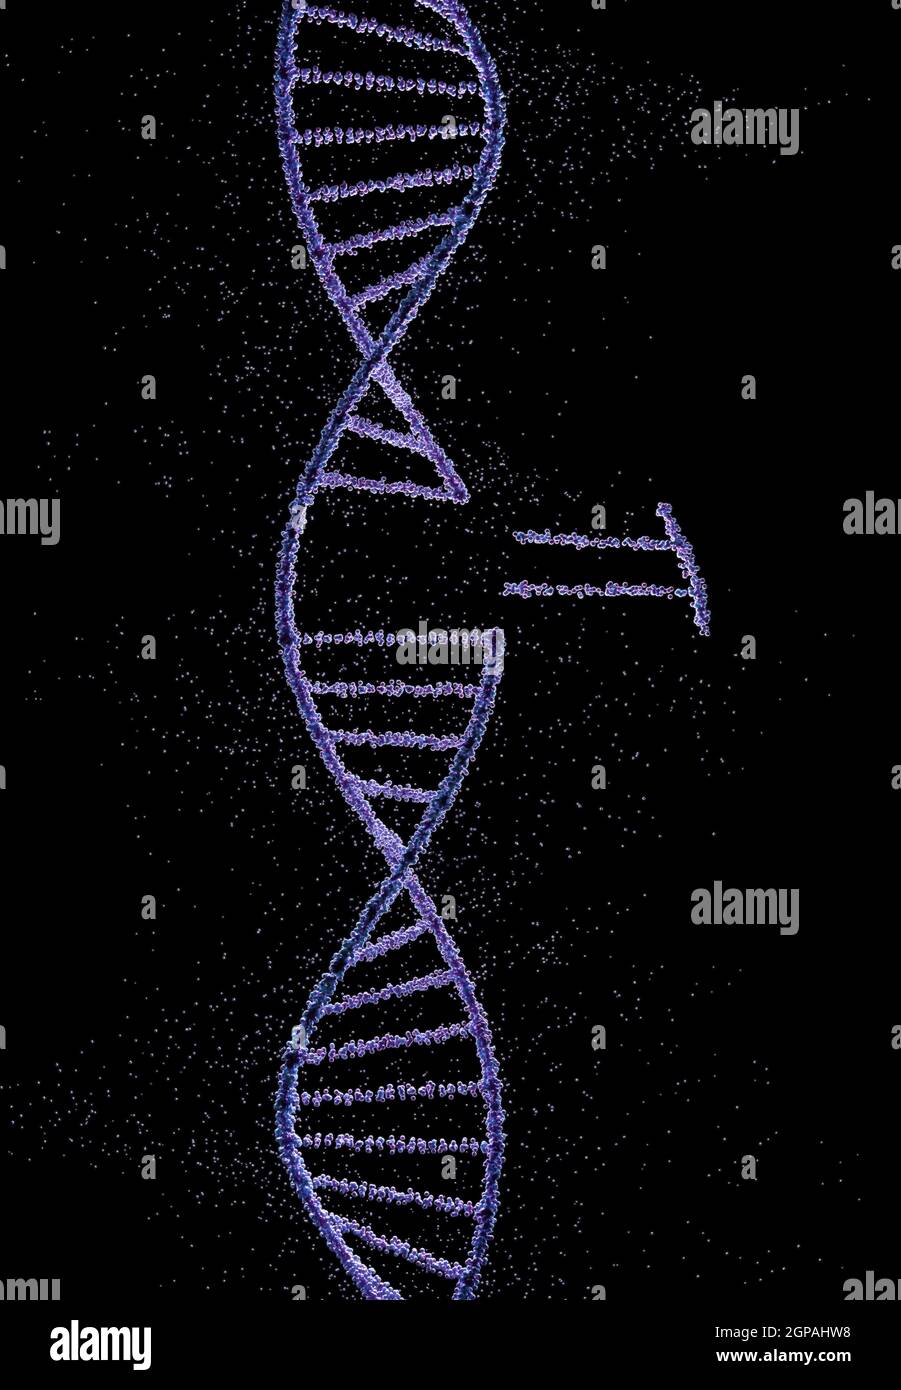 Helical DNA code with grouped spheres forming genetic molecules. Stock Photo